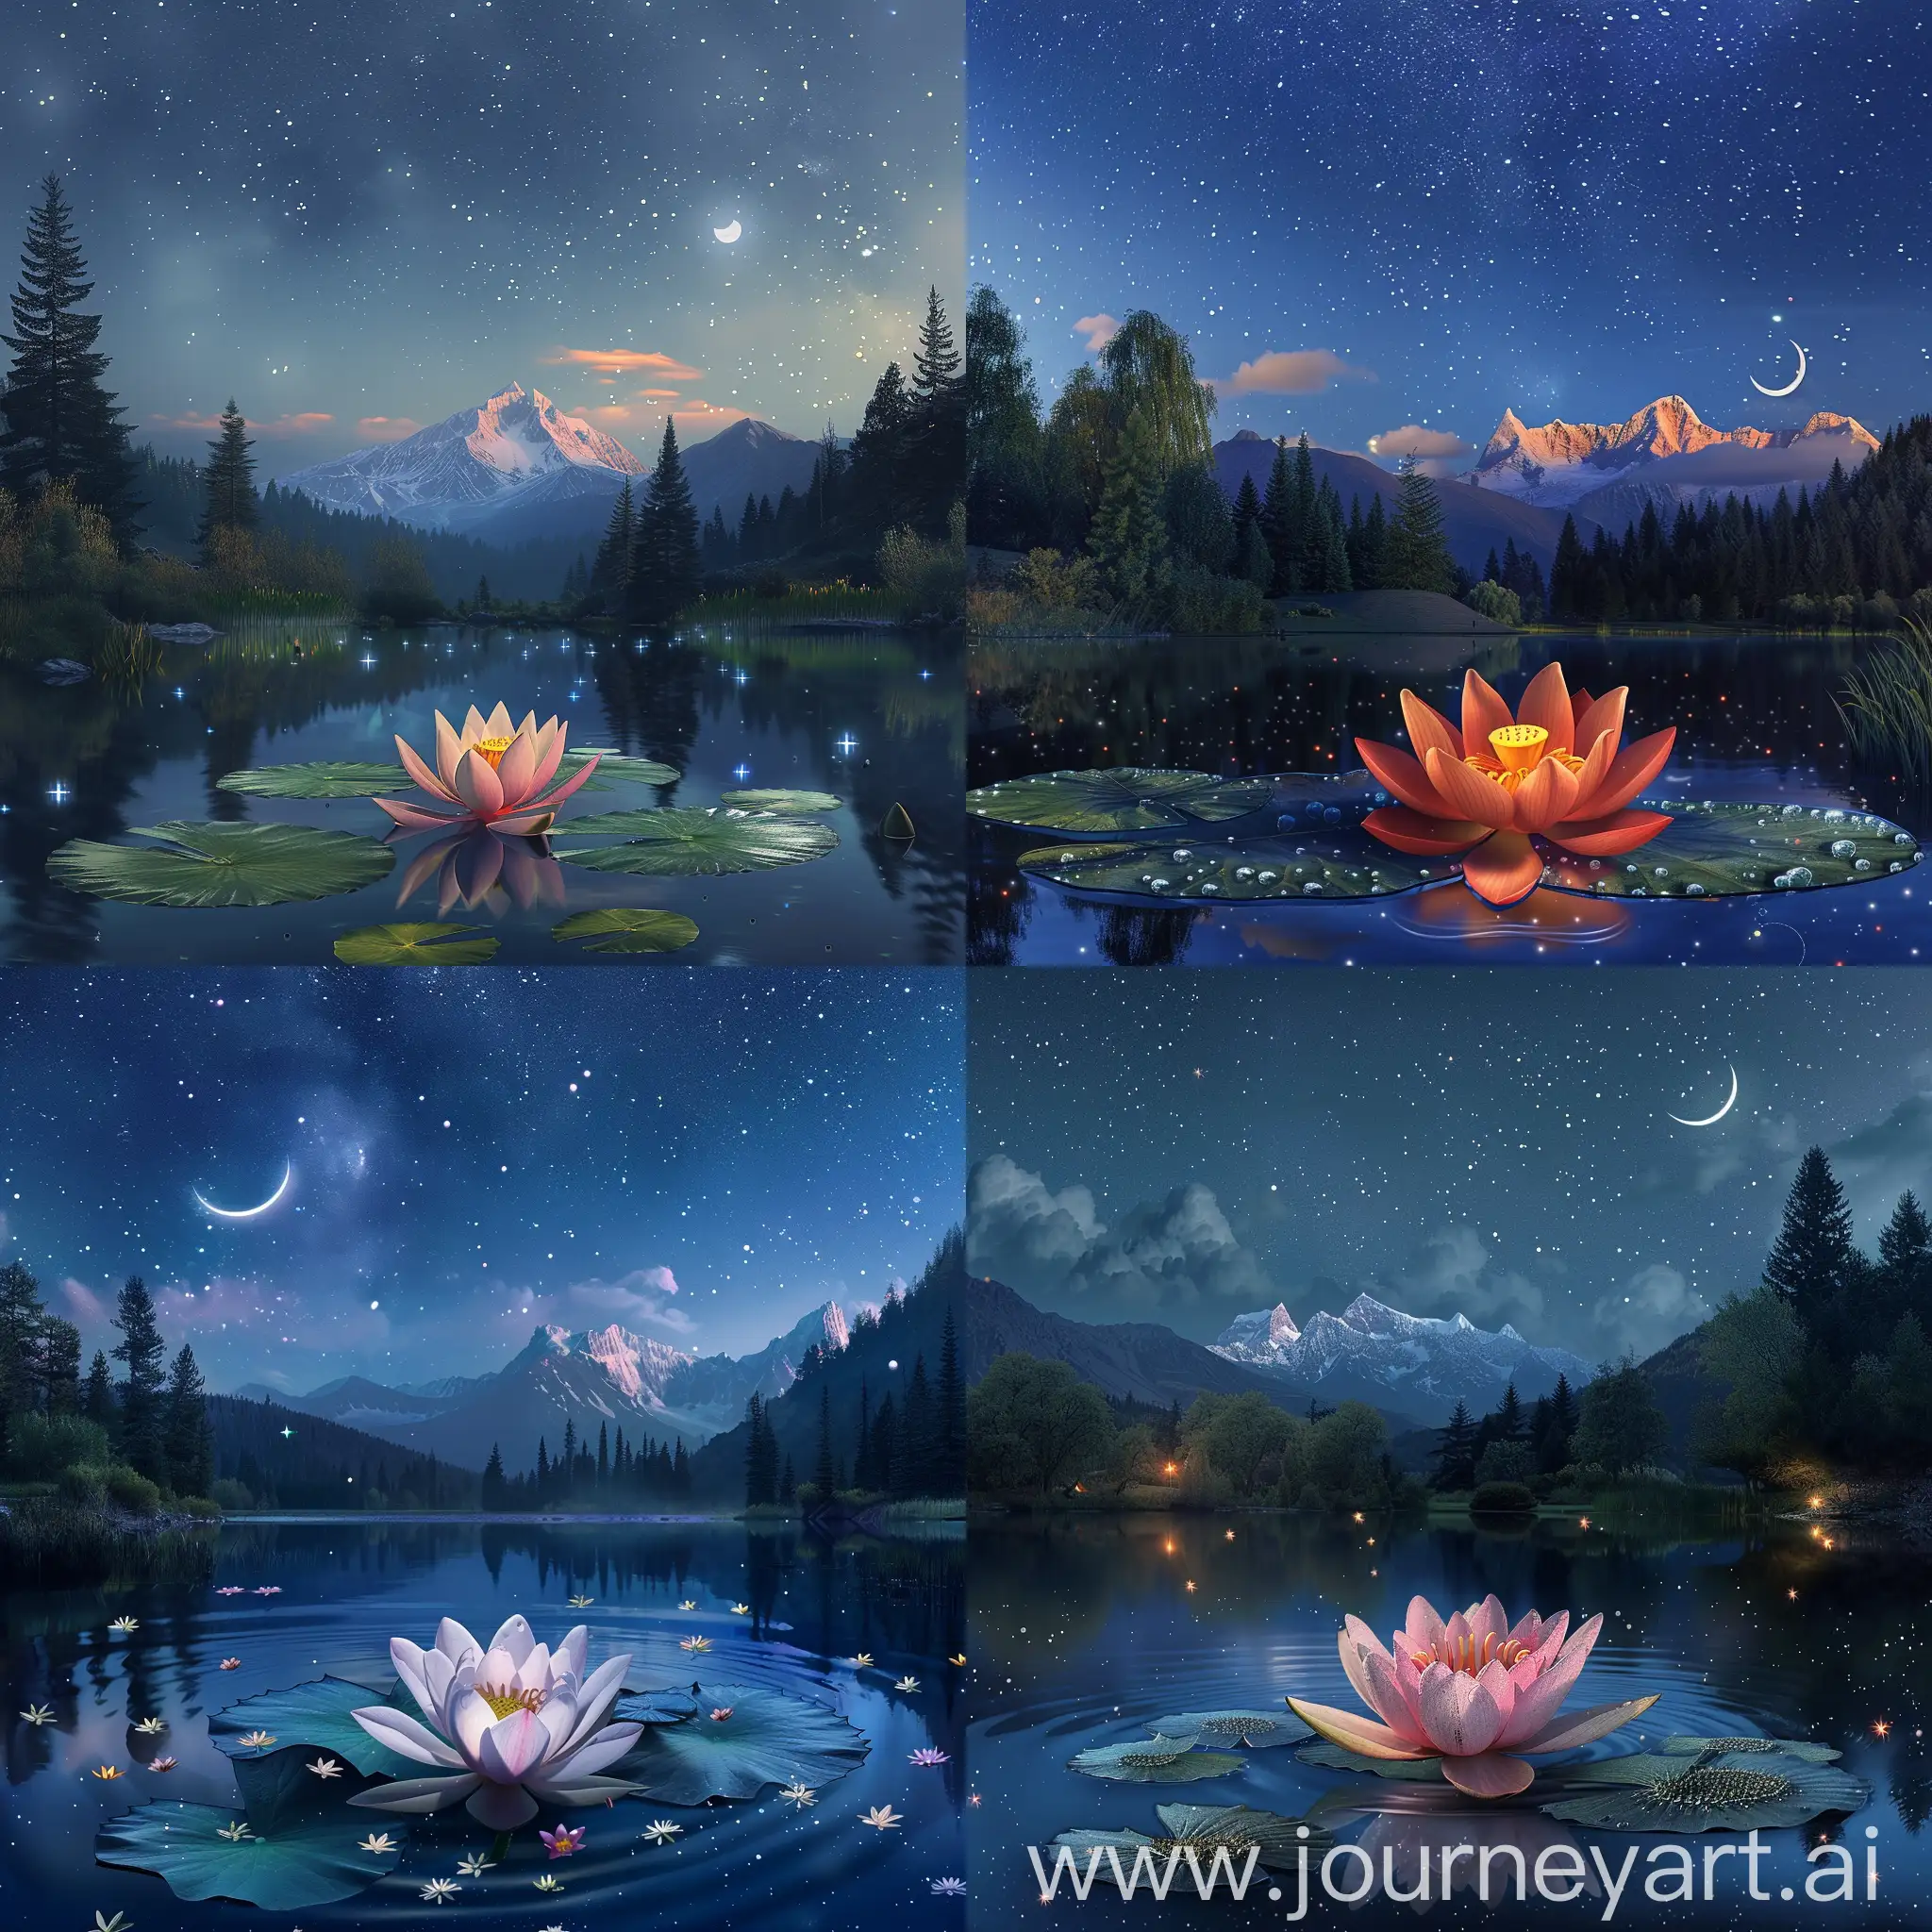 a lake with a blooming lotus, night, trees around, mountains with snow-capped peaks can be seen in the distance, stars and a crescent moon in the sky